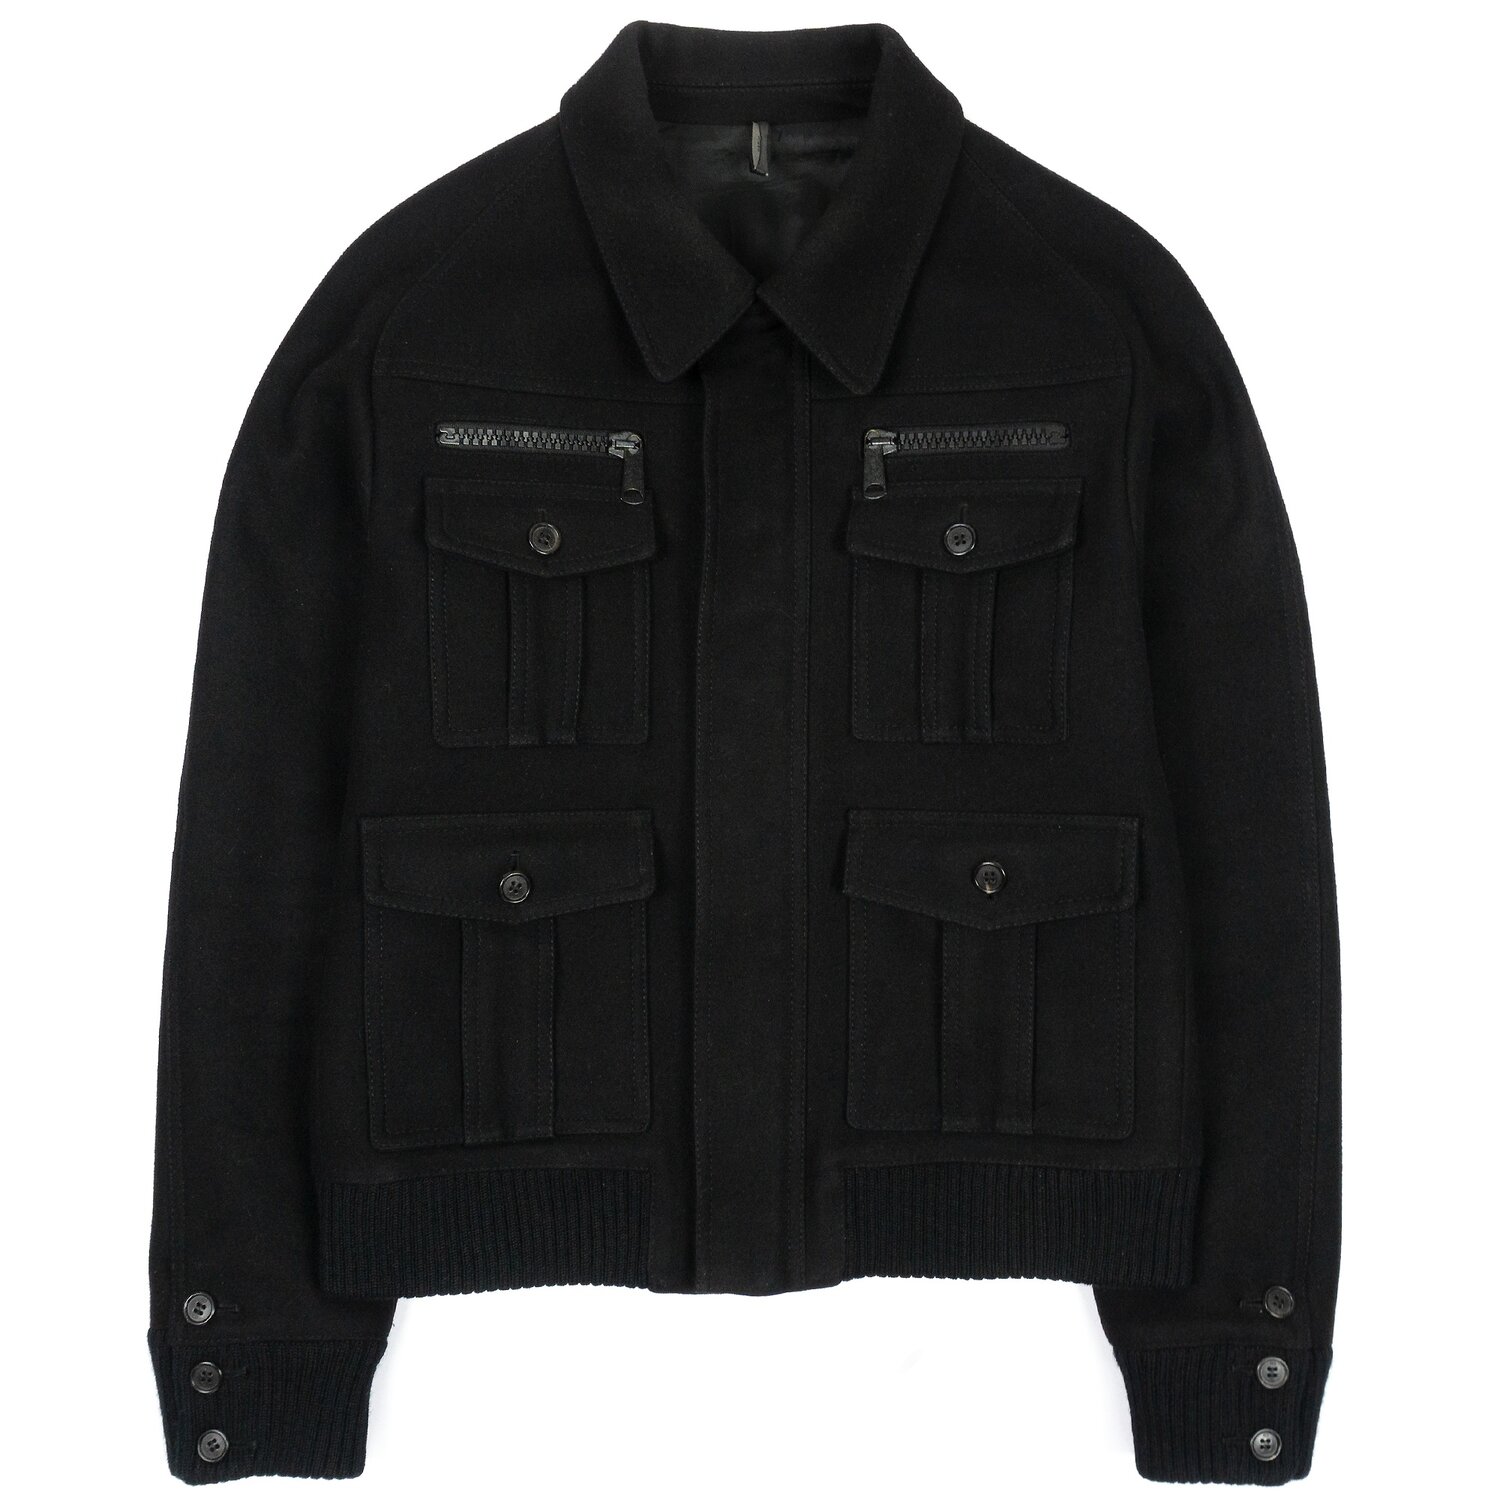 Dior Homme AW06 Military Jacket — scatterbrain archives